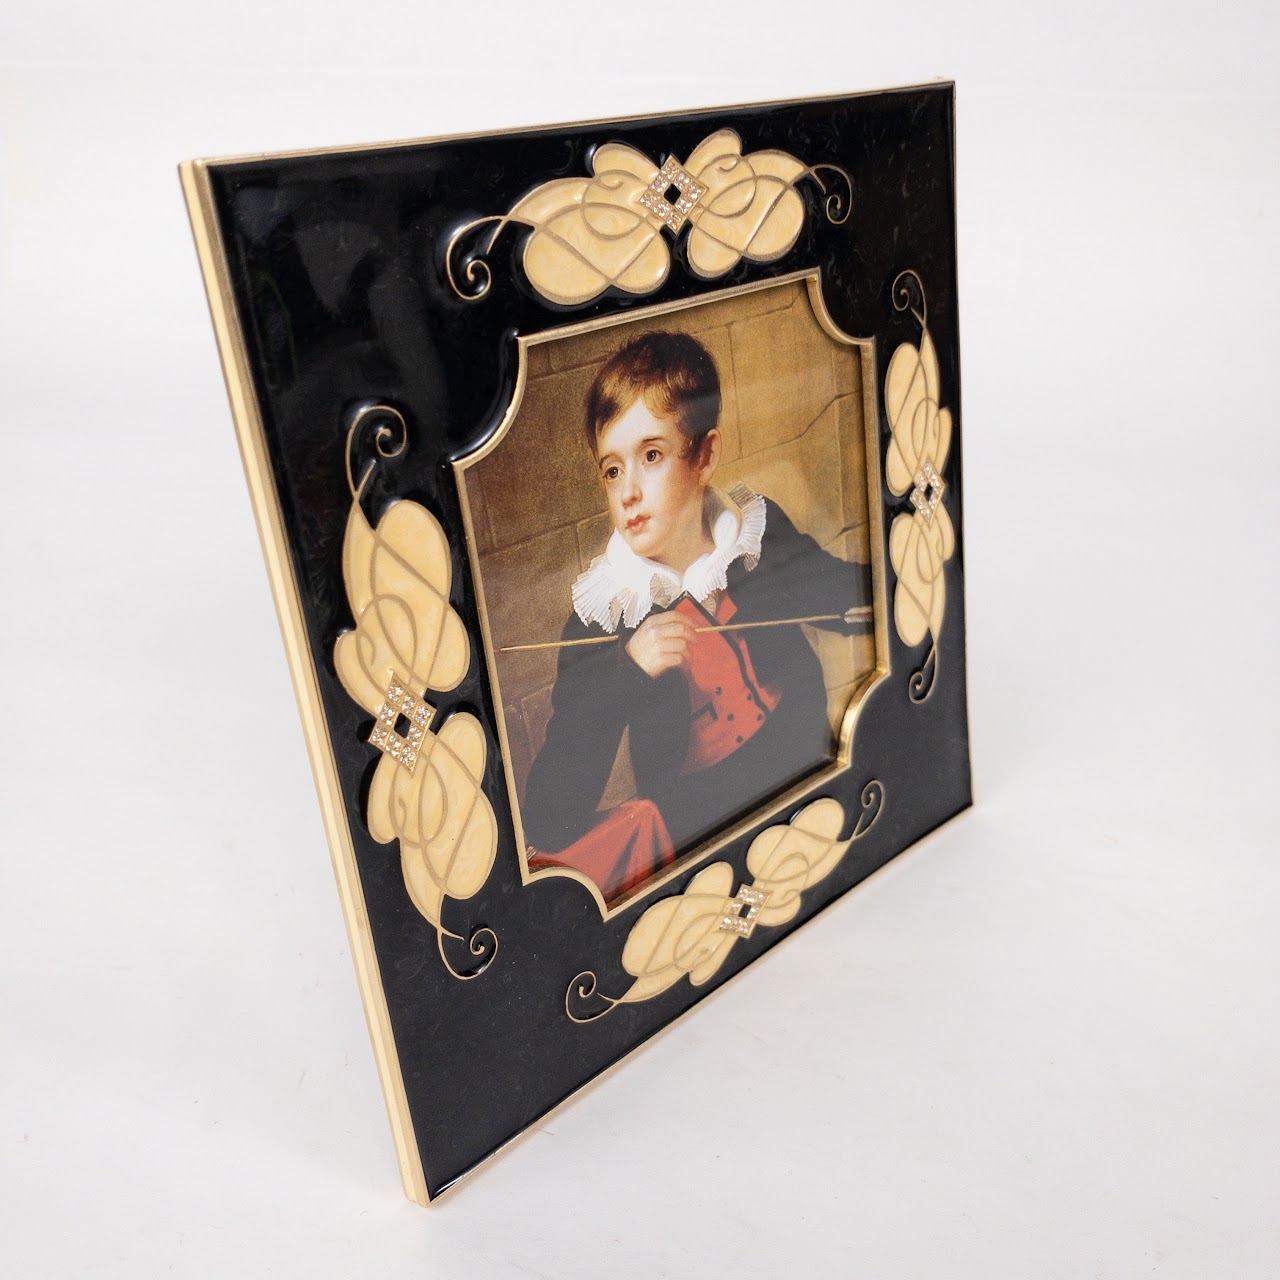 Jay Strongwater 5"x5" Photo Frame